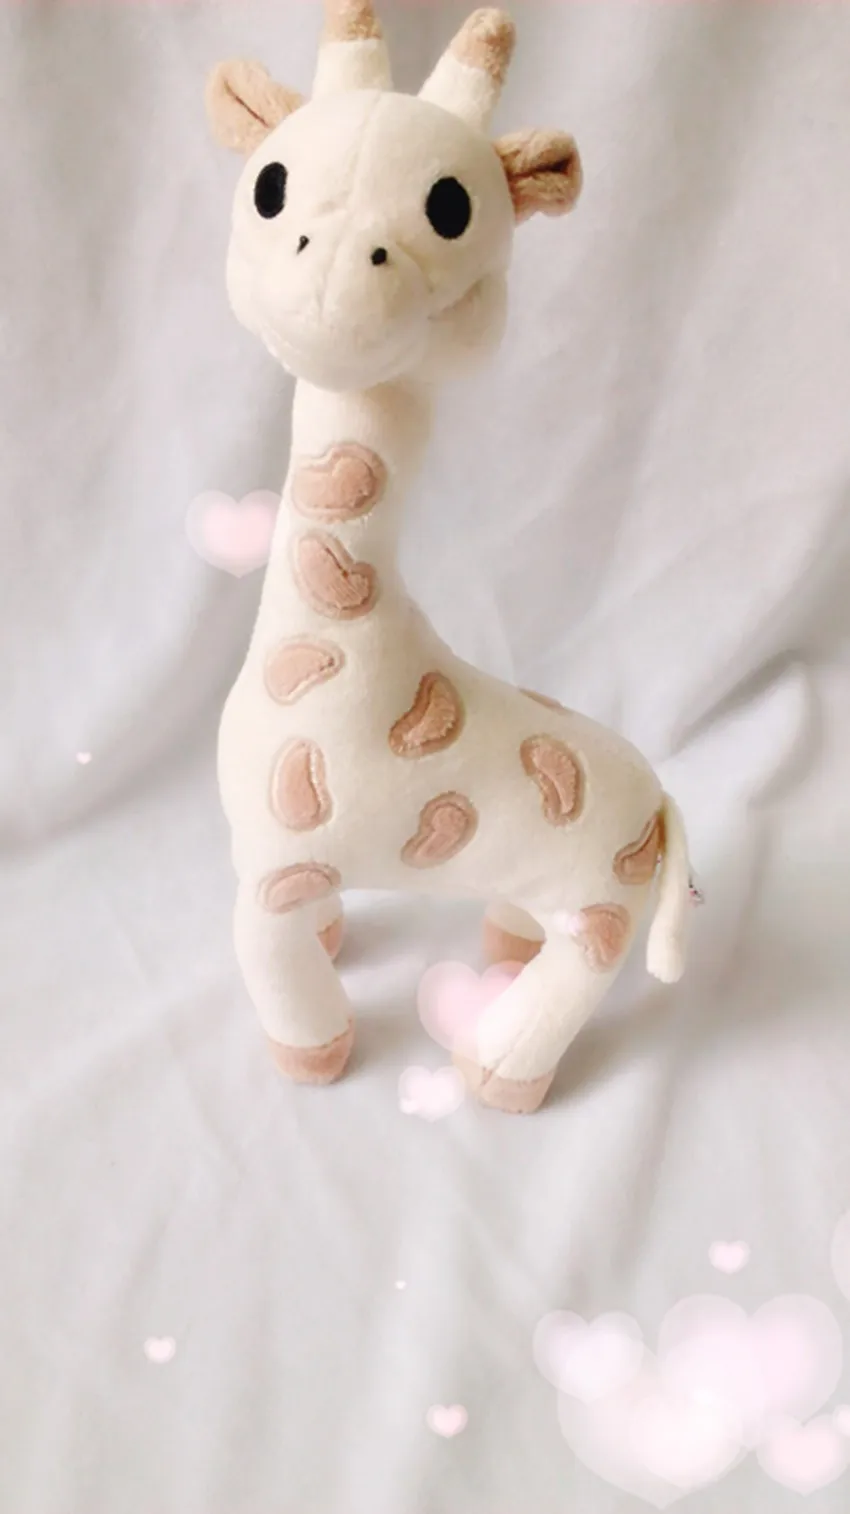 SOPHIE THE GIRAFFE SQUEAKER RATTLE BABY TOY 